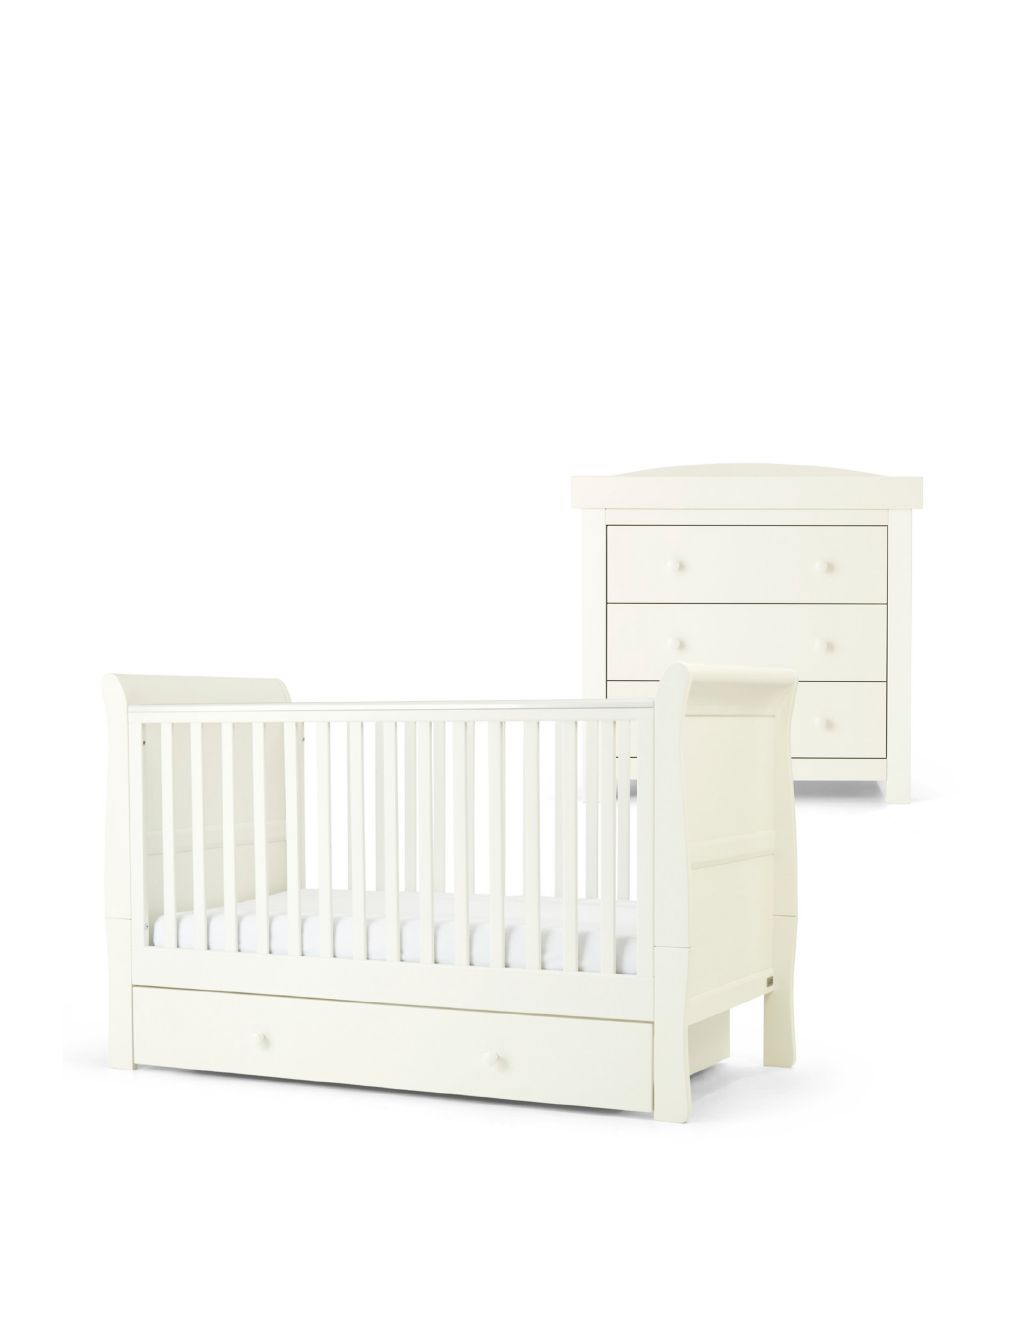 Mia 2 Piece Cotbed Set with Dresser image 1